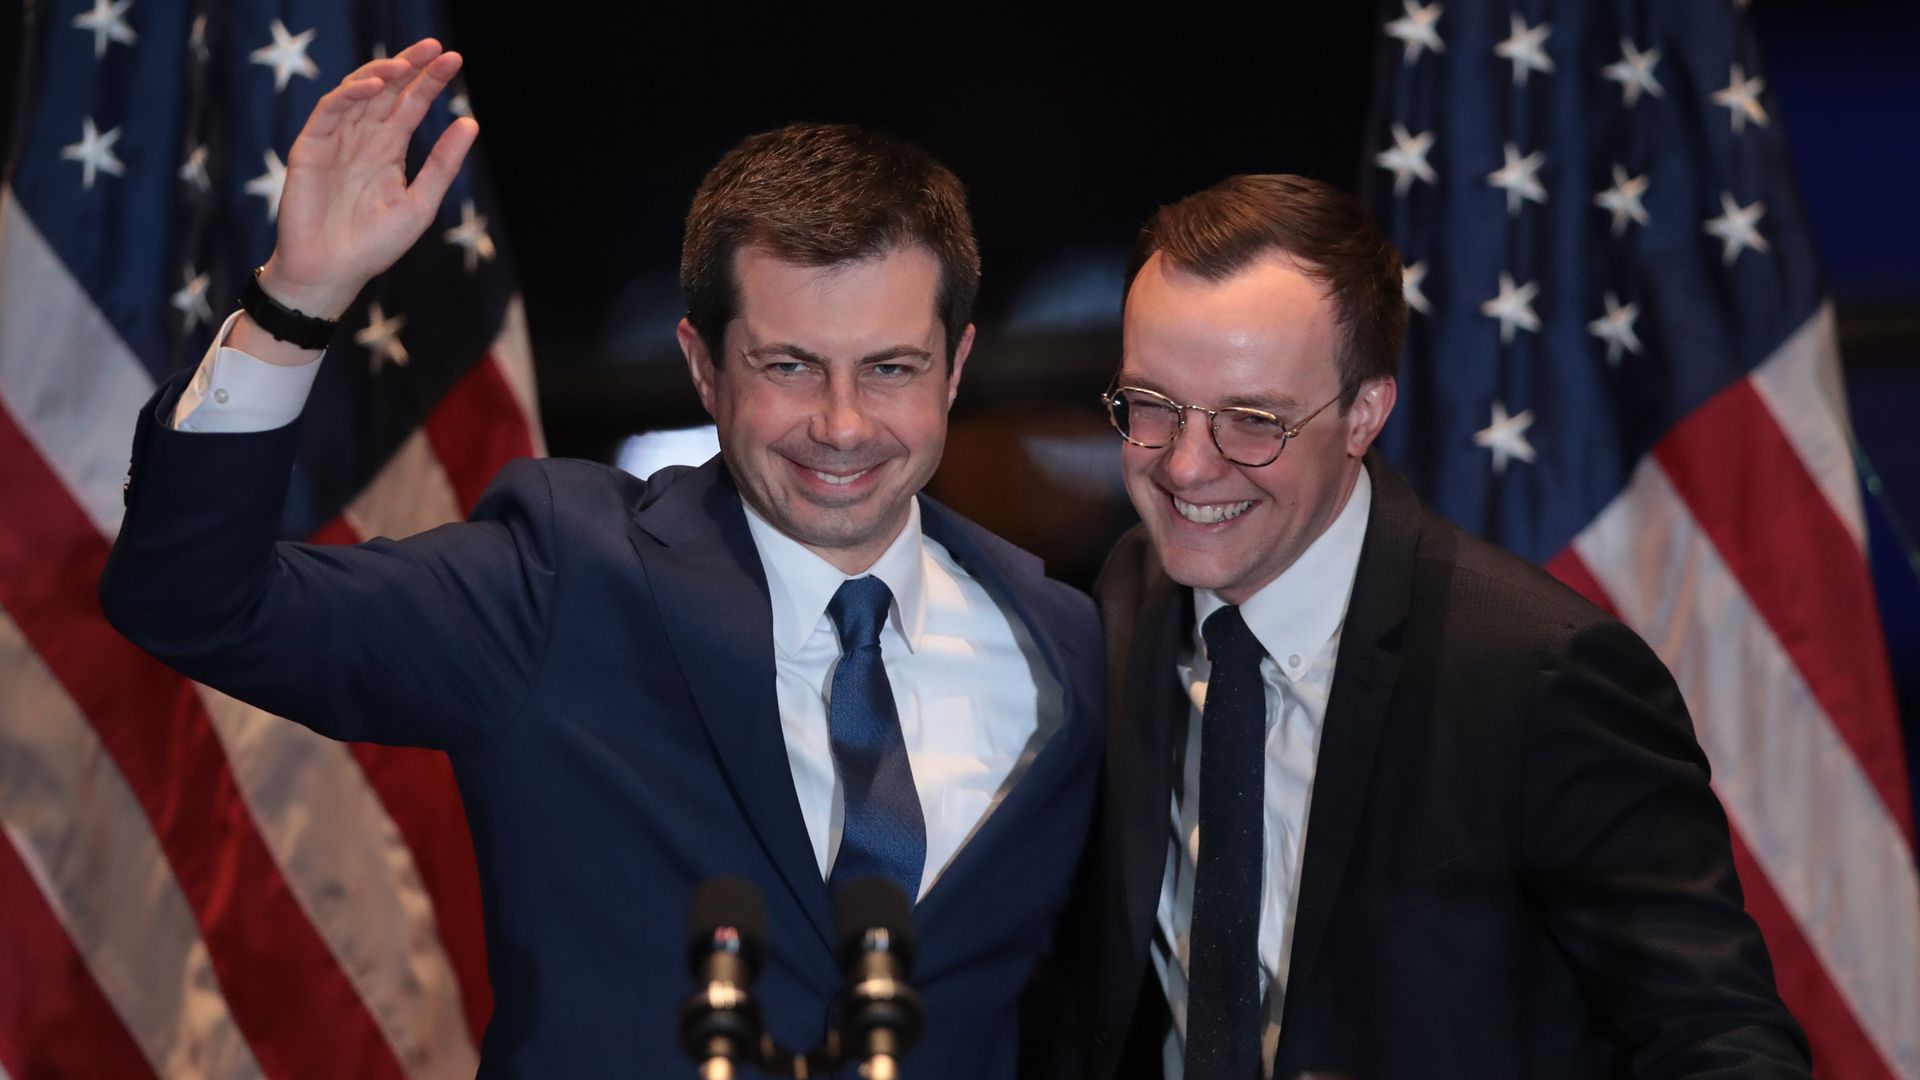 With his husband Chasten, Pete Buttigieg announces he is ending campaign to be the Democratic nominee for president during a speech at the Century Center on March 01, 2020 in South Bend, Indiana